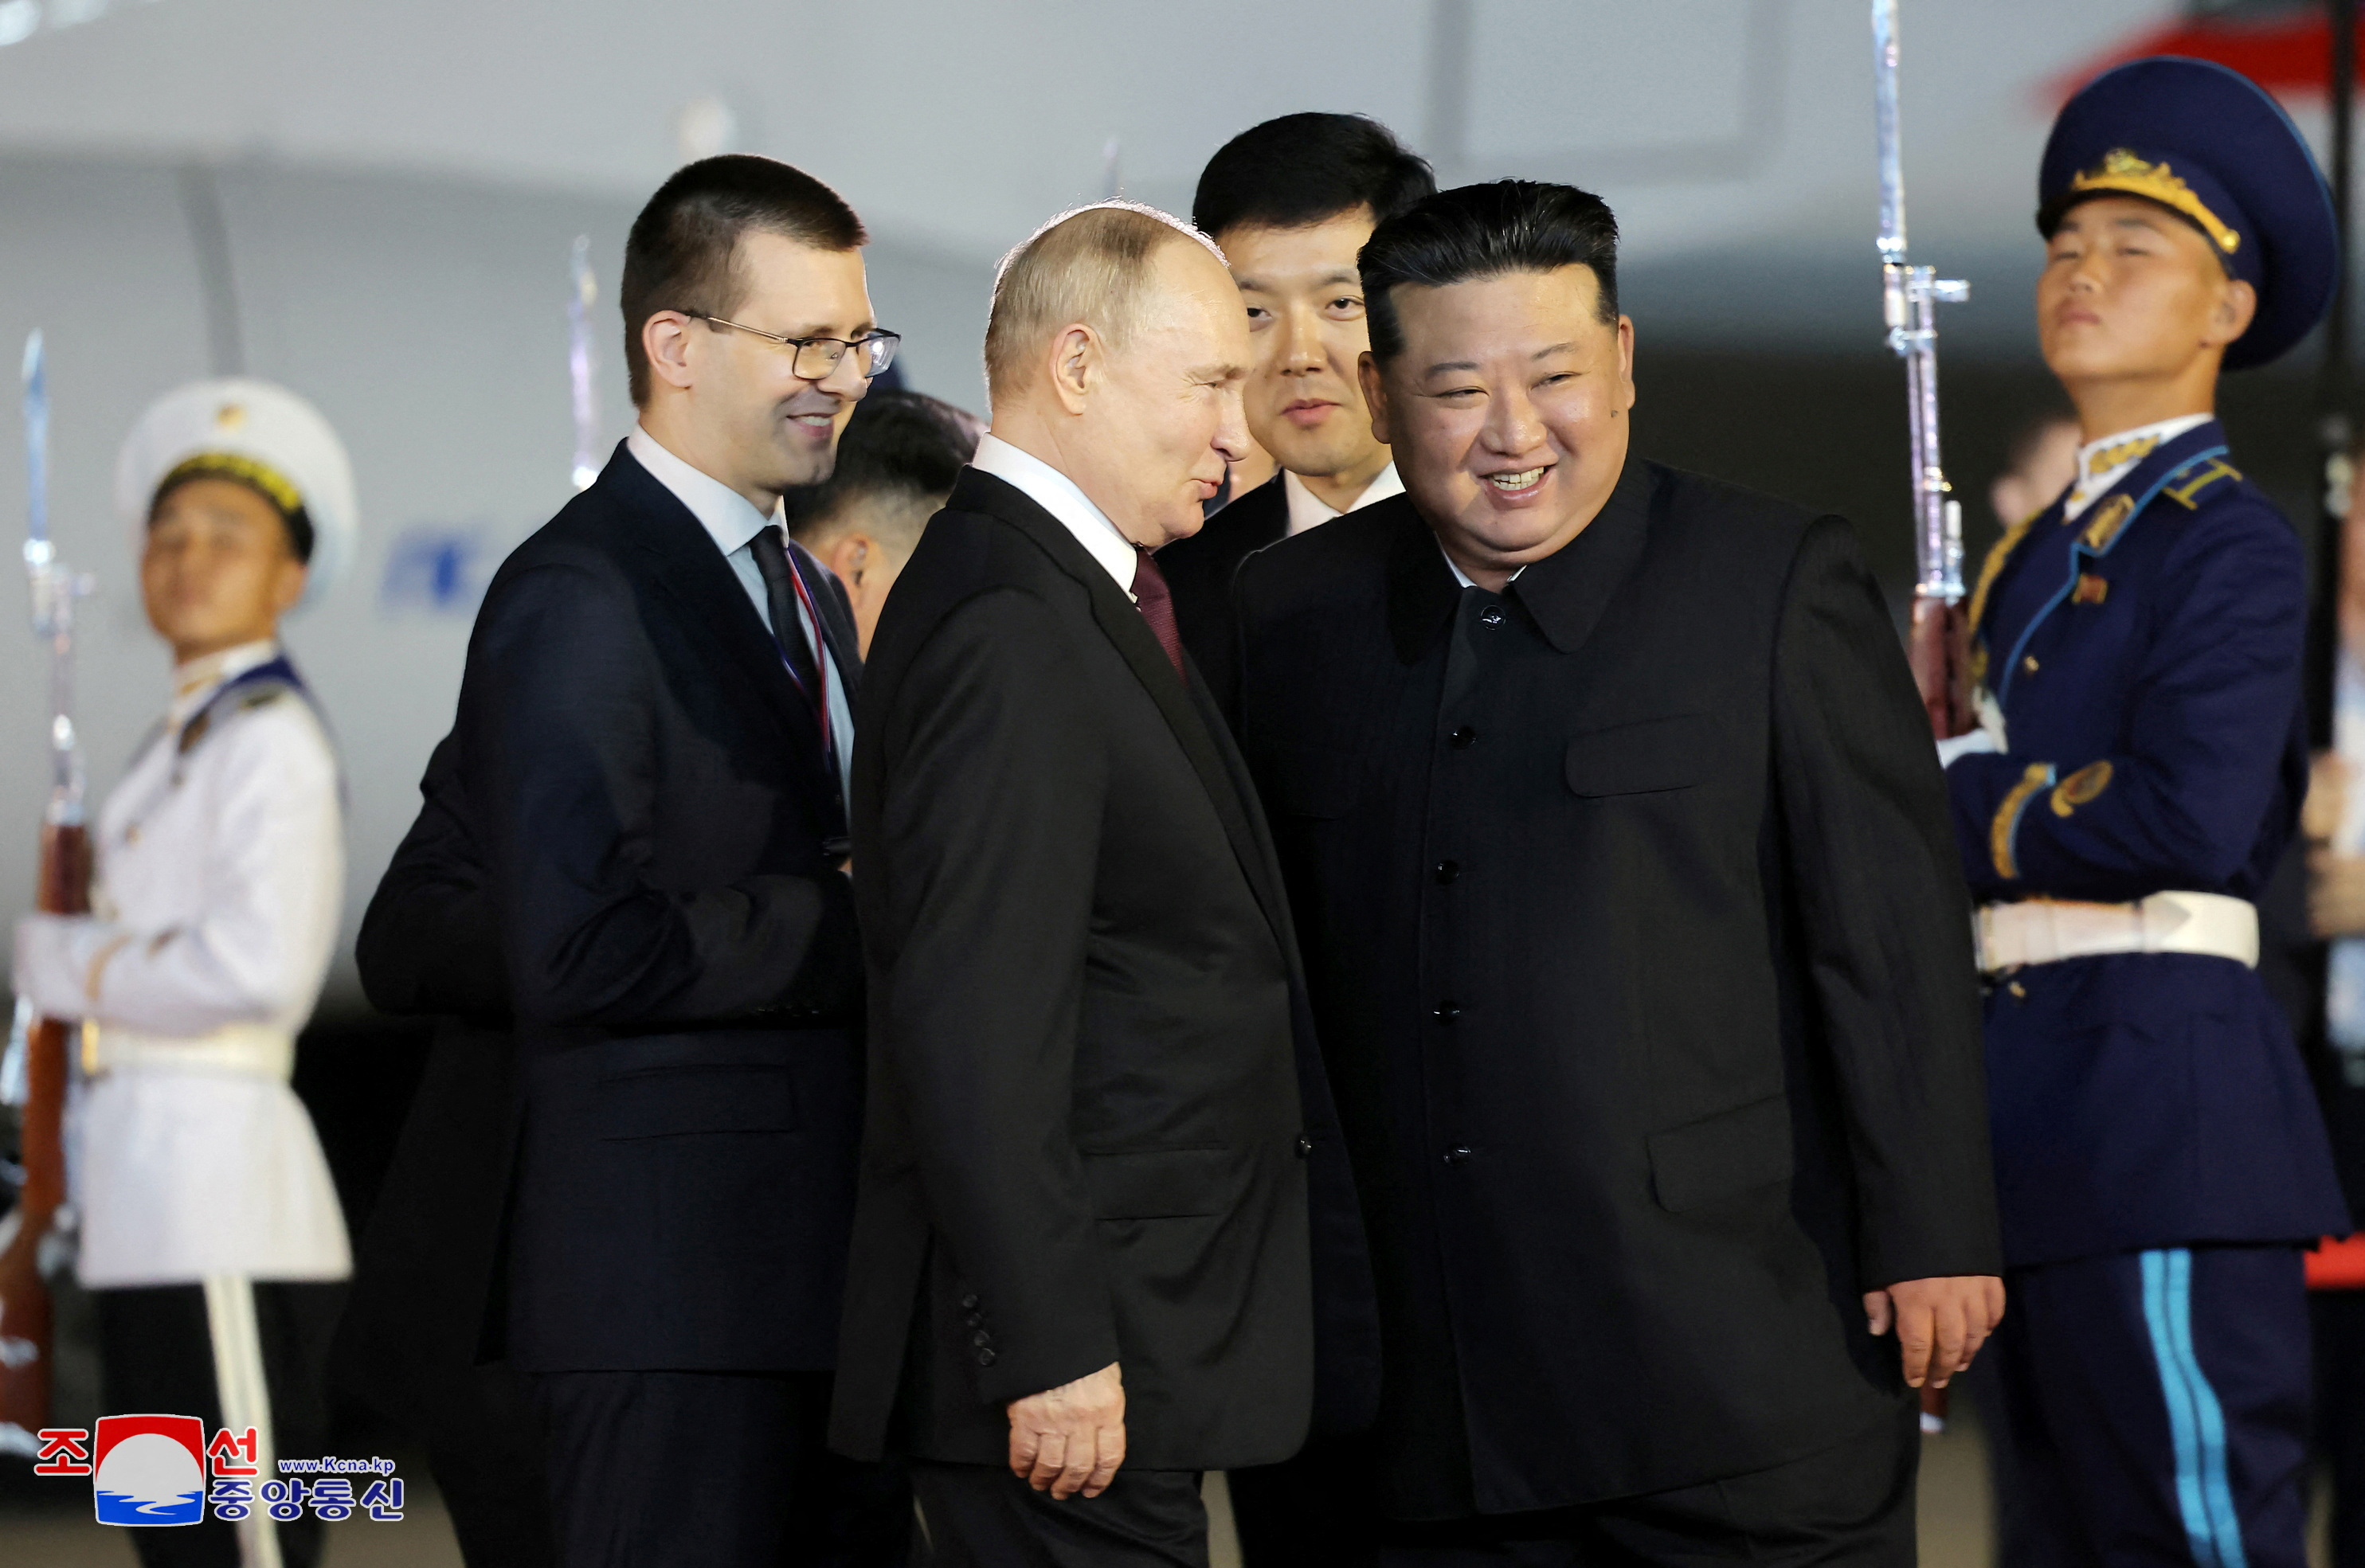 Russian President Vladimir Putin is welcomed by North Korean leader Kim Jong Un upon his arrival at an airport in Pyongyang